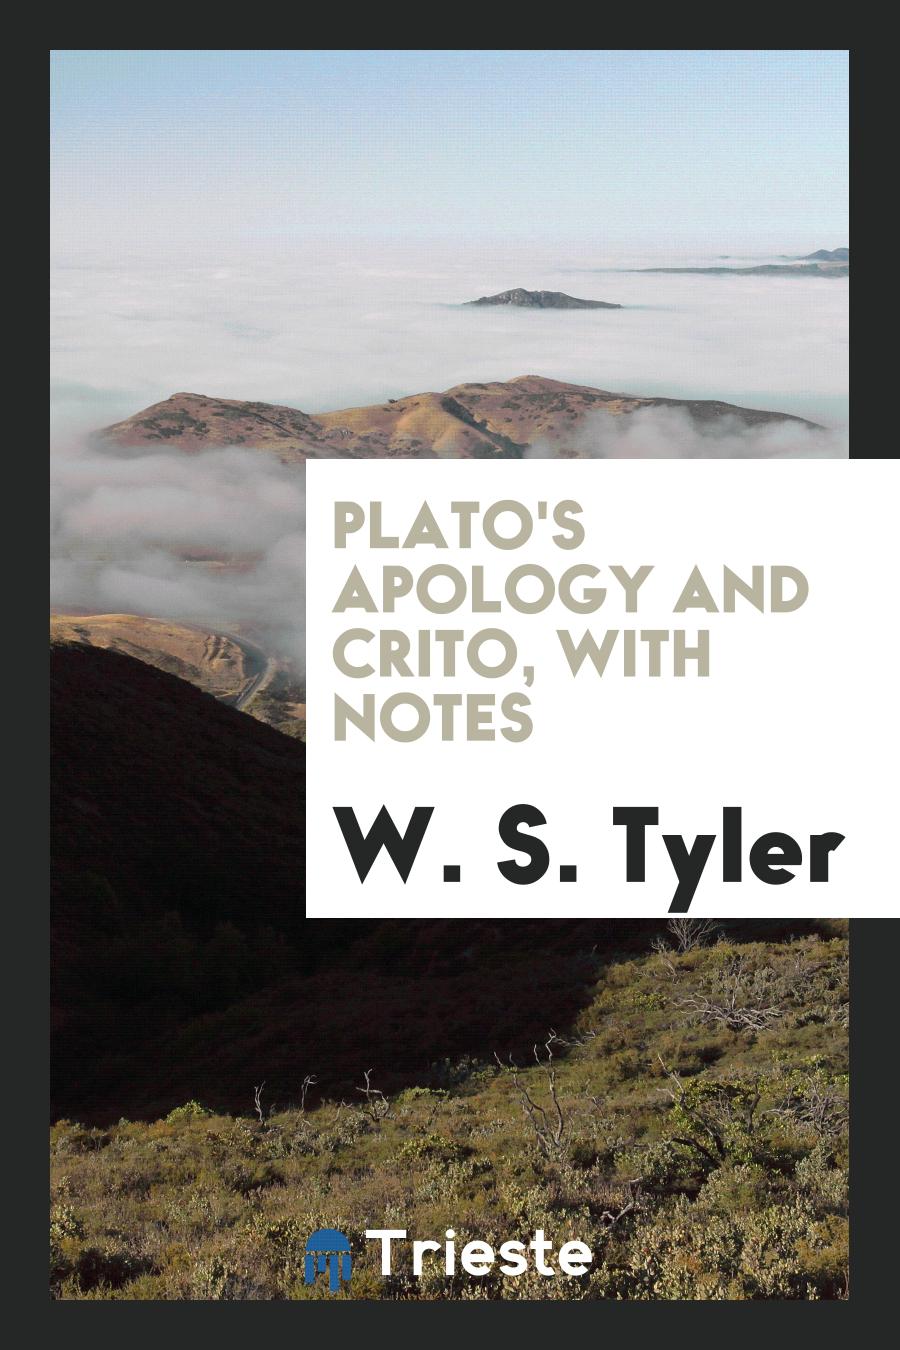 Plato's Apology and Crito, with Notes